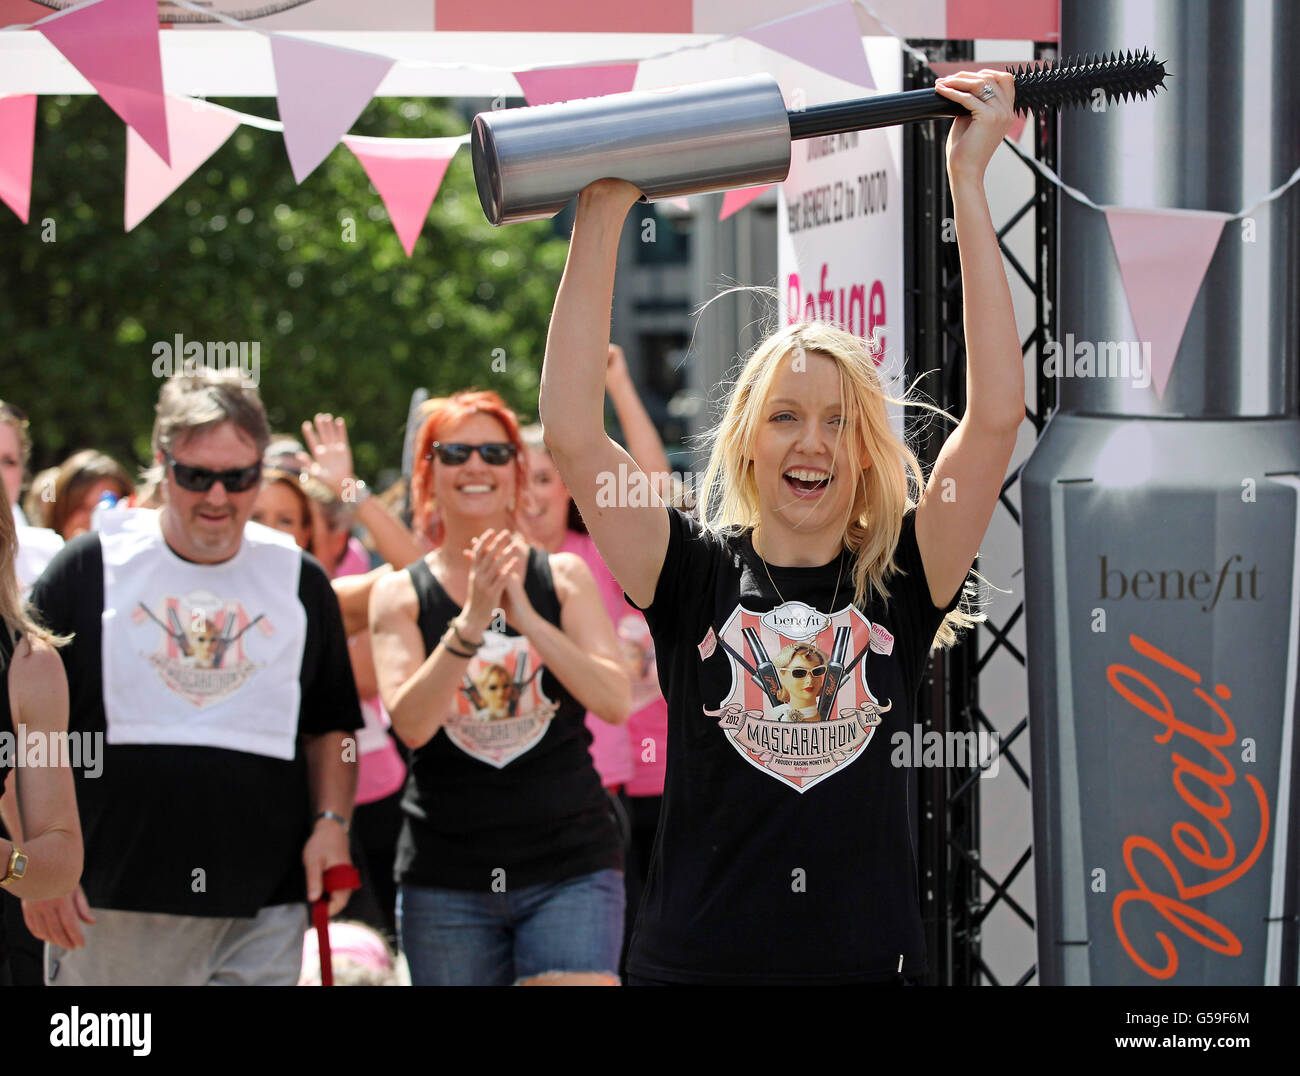 Radio DJ Lauren Laverne completes the final leg of The Benefit Cosmetics Mascarathon in Spitalfields, London, to raise funds and awareness for women's domestic violence charity Refuge. Stock Photo